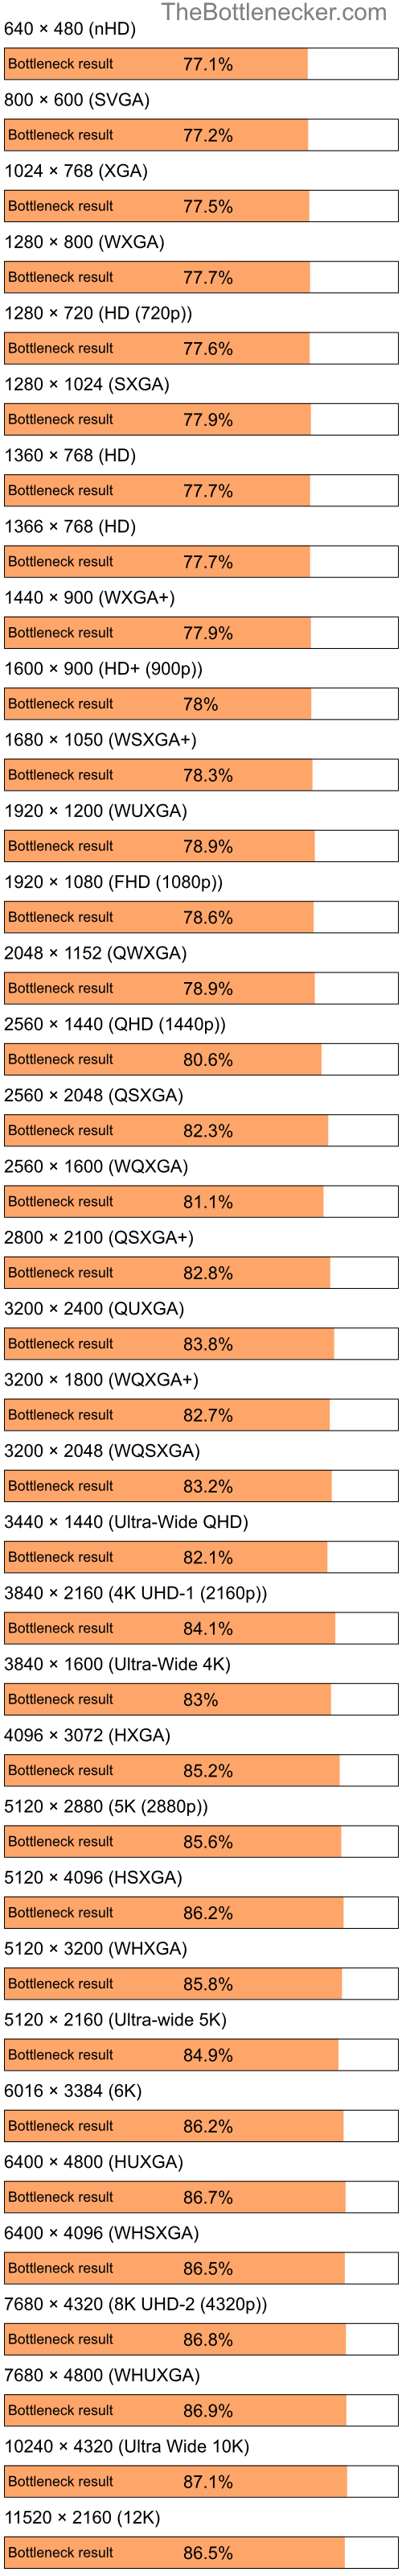 Bottleneck results by resolution for Intel Celeron and NVIDIA GeForce 6200 TurboCache in Graphic Card Intense Tasks